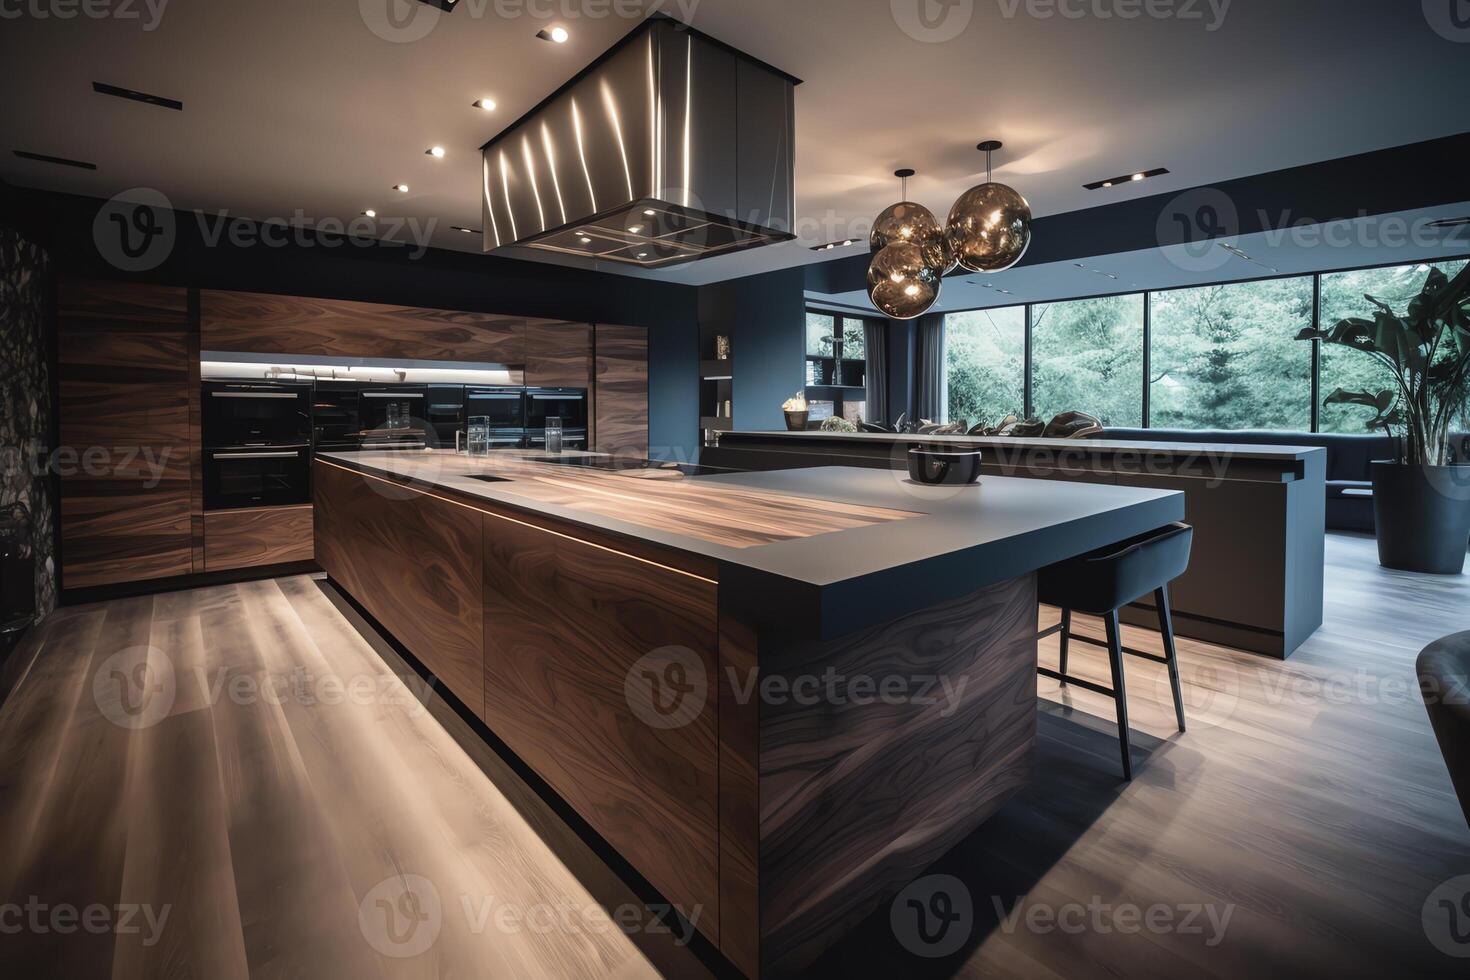 Modern kitchen design makes flooding an unavoidable reality what you can do to avoid disaster. photo